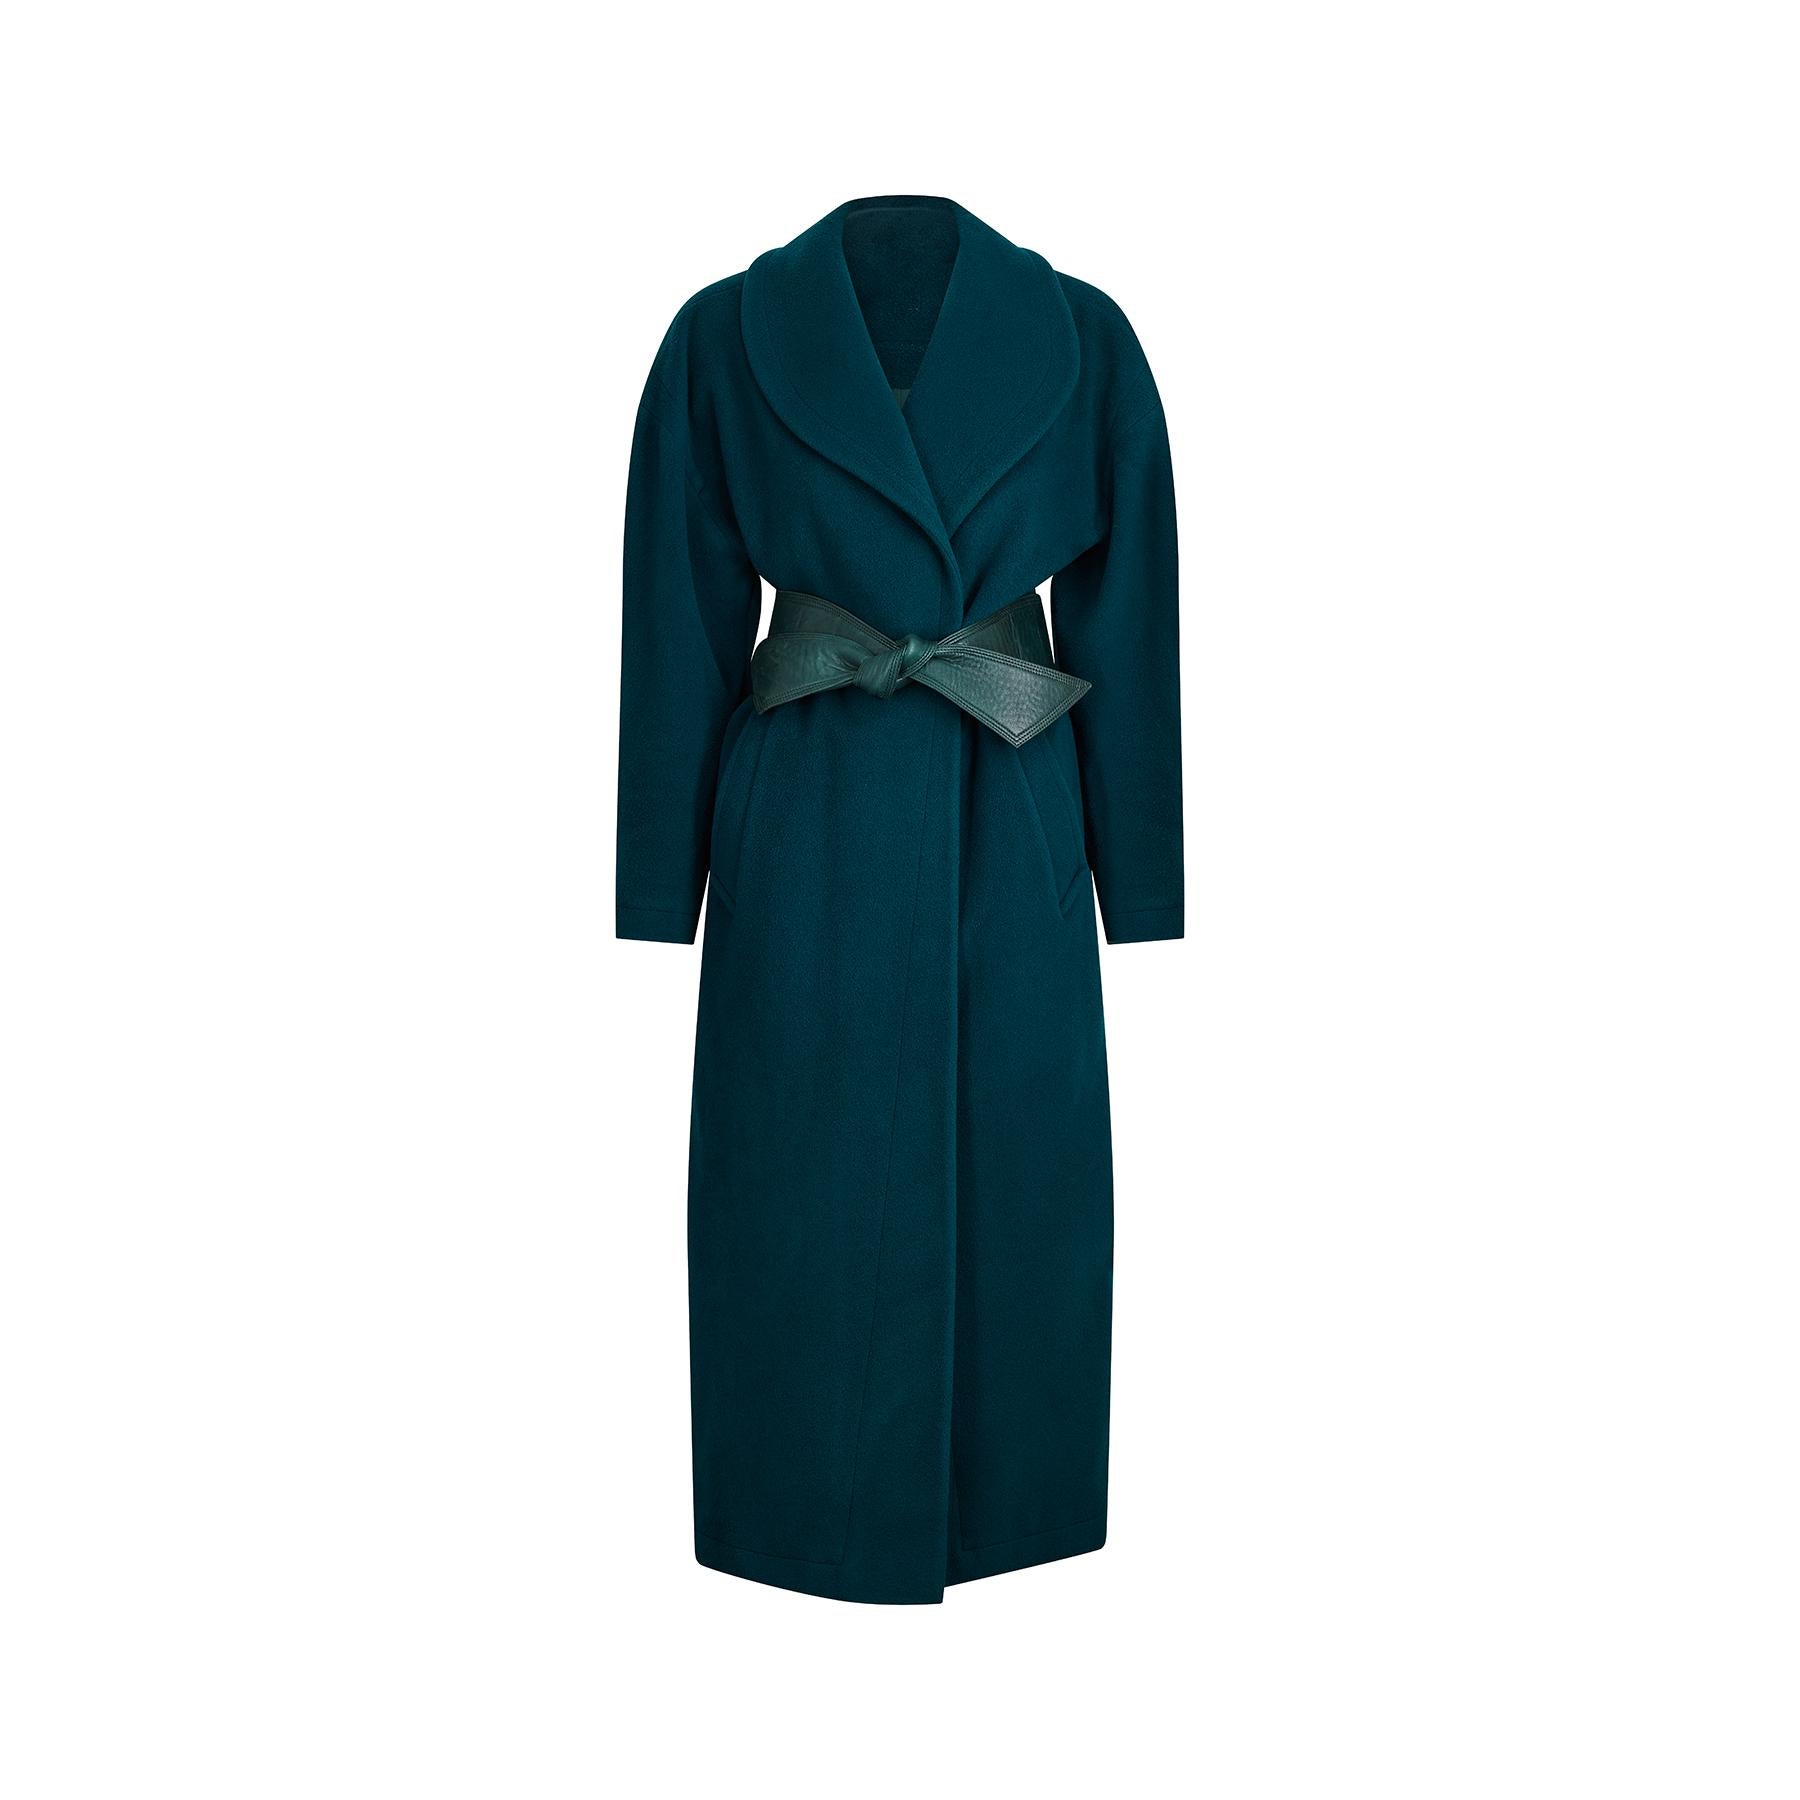 1980s Claude Montana Teal Green Wool Overcoat In Excellent Condition For Sale In London, GB